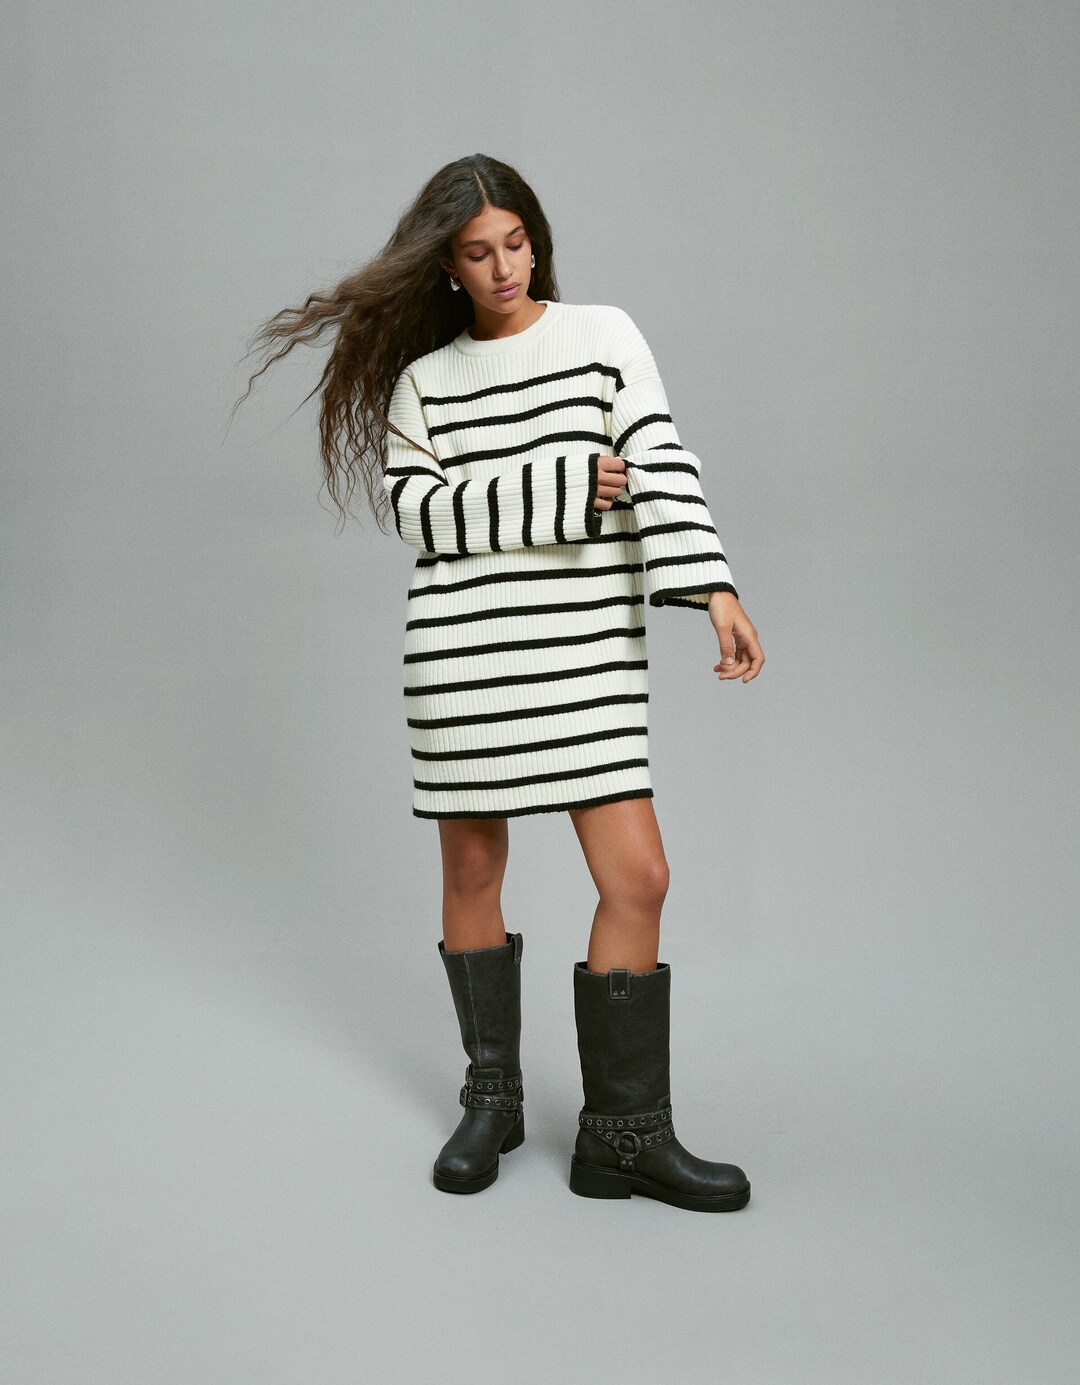 Knit striped mini dress with long sleeves